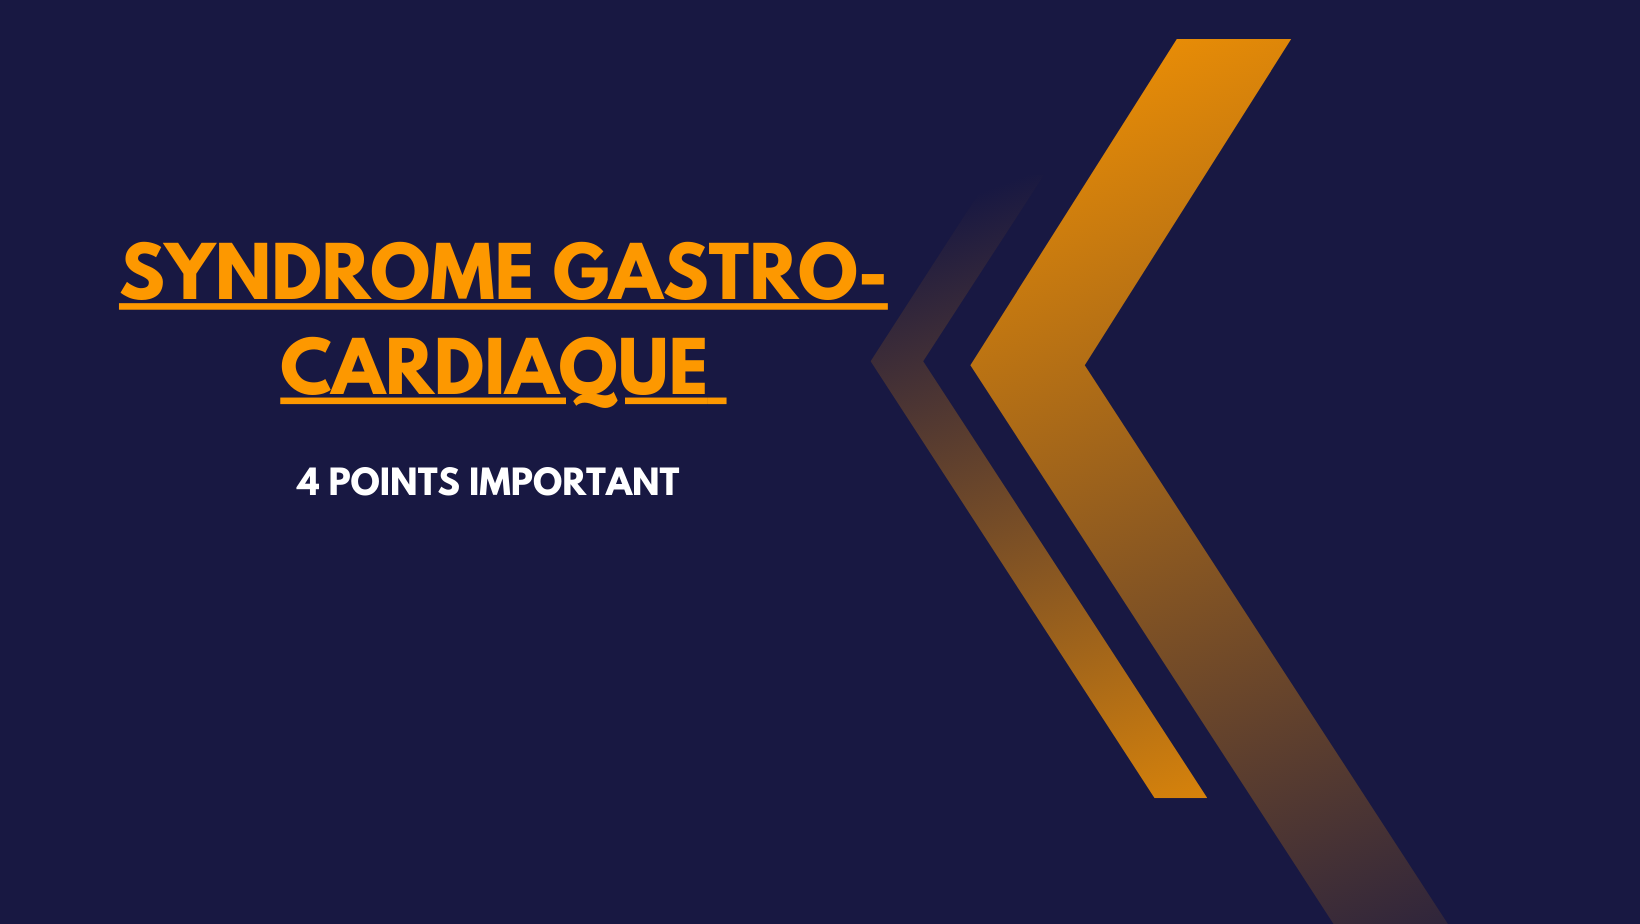 syndrome gastro-cardiaque | 4 Points Important